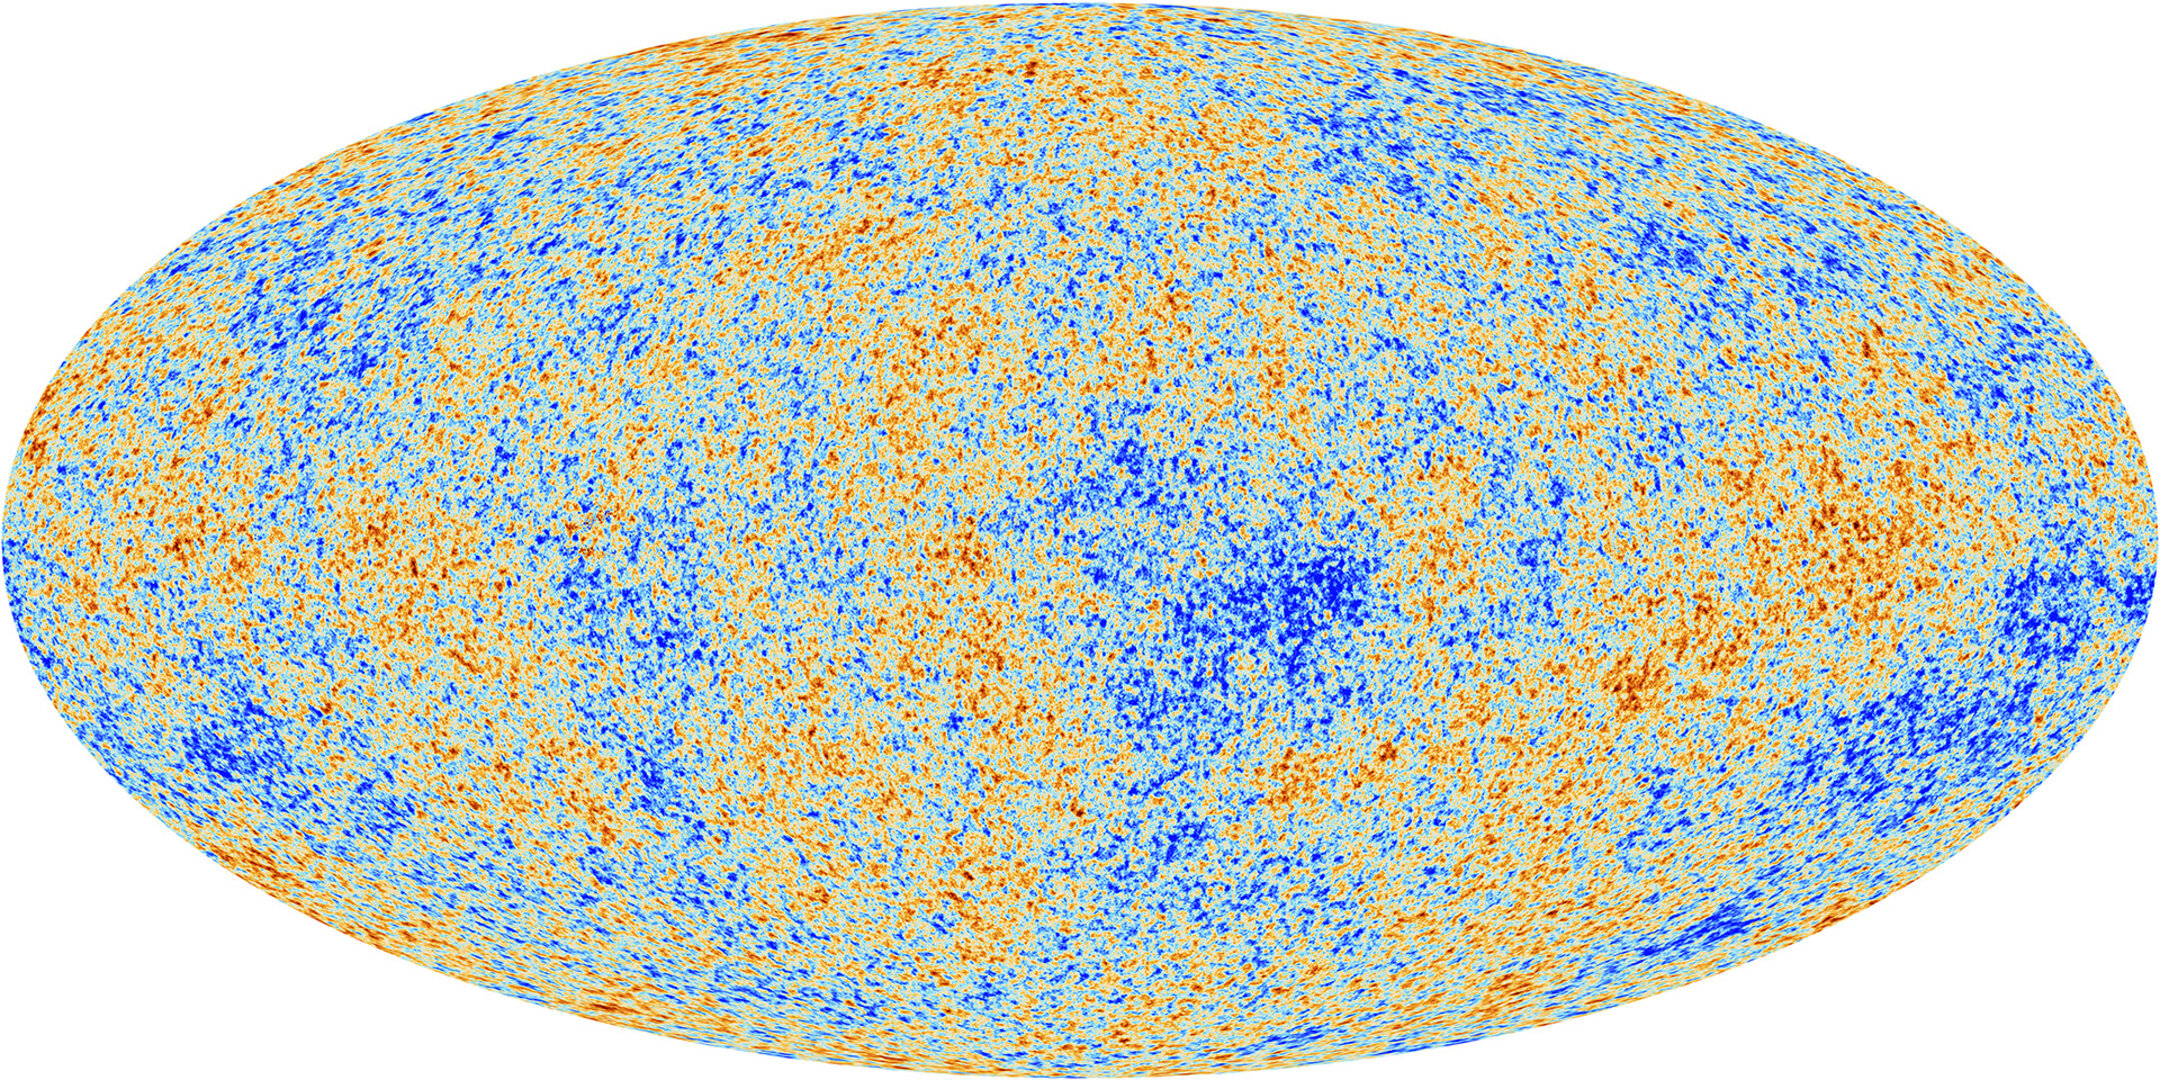 A oval shape filled with orange and blue patches representing CMB leftover from the Big Bang.